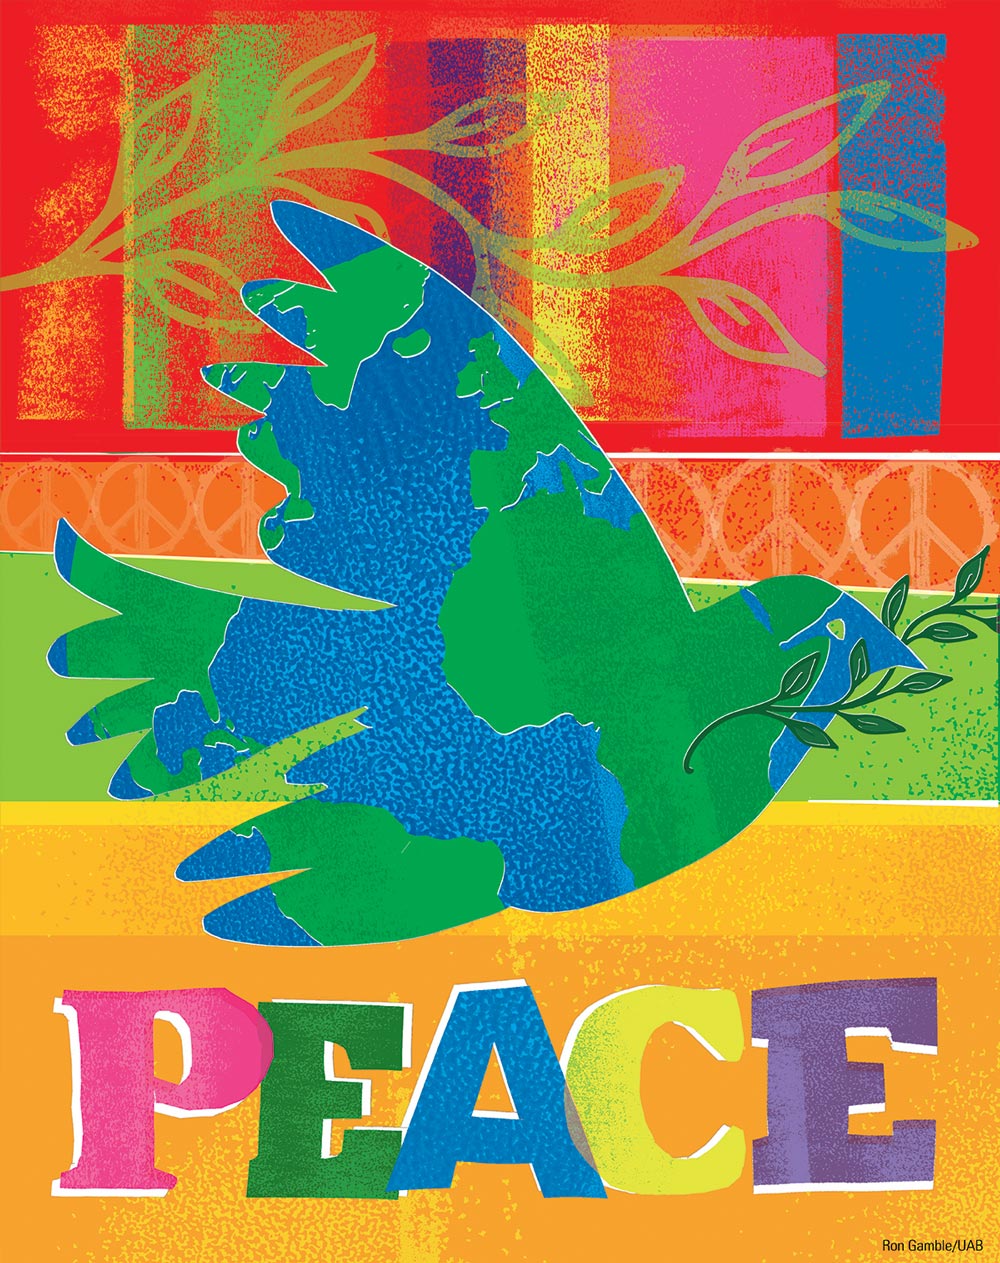 Colorful illustration of dove containing world map over the word 'Peace'; illustration by Ron Gamble